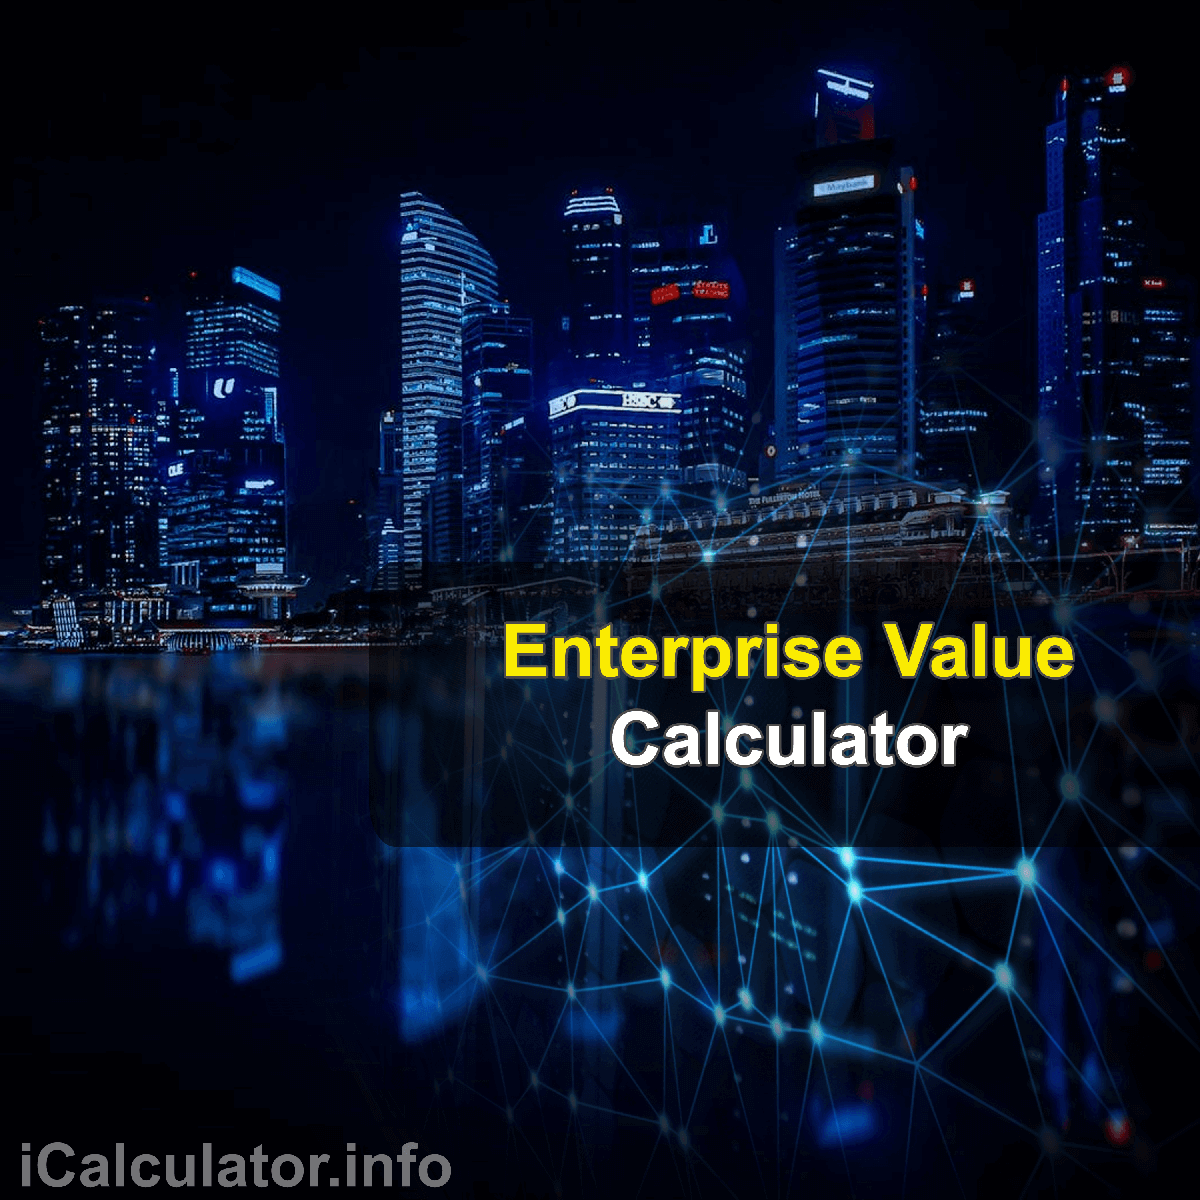 Enterprise Value Calculator. This image provides details of how to calculate enterprise value using a good calculator and notepad. By using the enterprise value formula, the Enterprise Value Calculator provides a true calculation of the value a company as a whole rather than just focusing on its current market capitalization. This shows a real value that gives a clearer picture of a company's worth to investors.